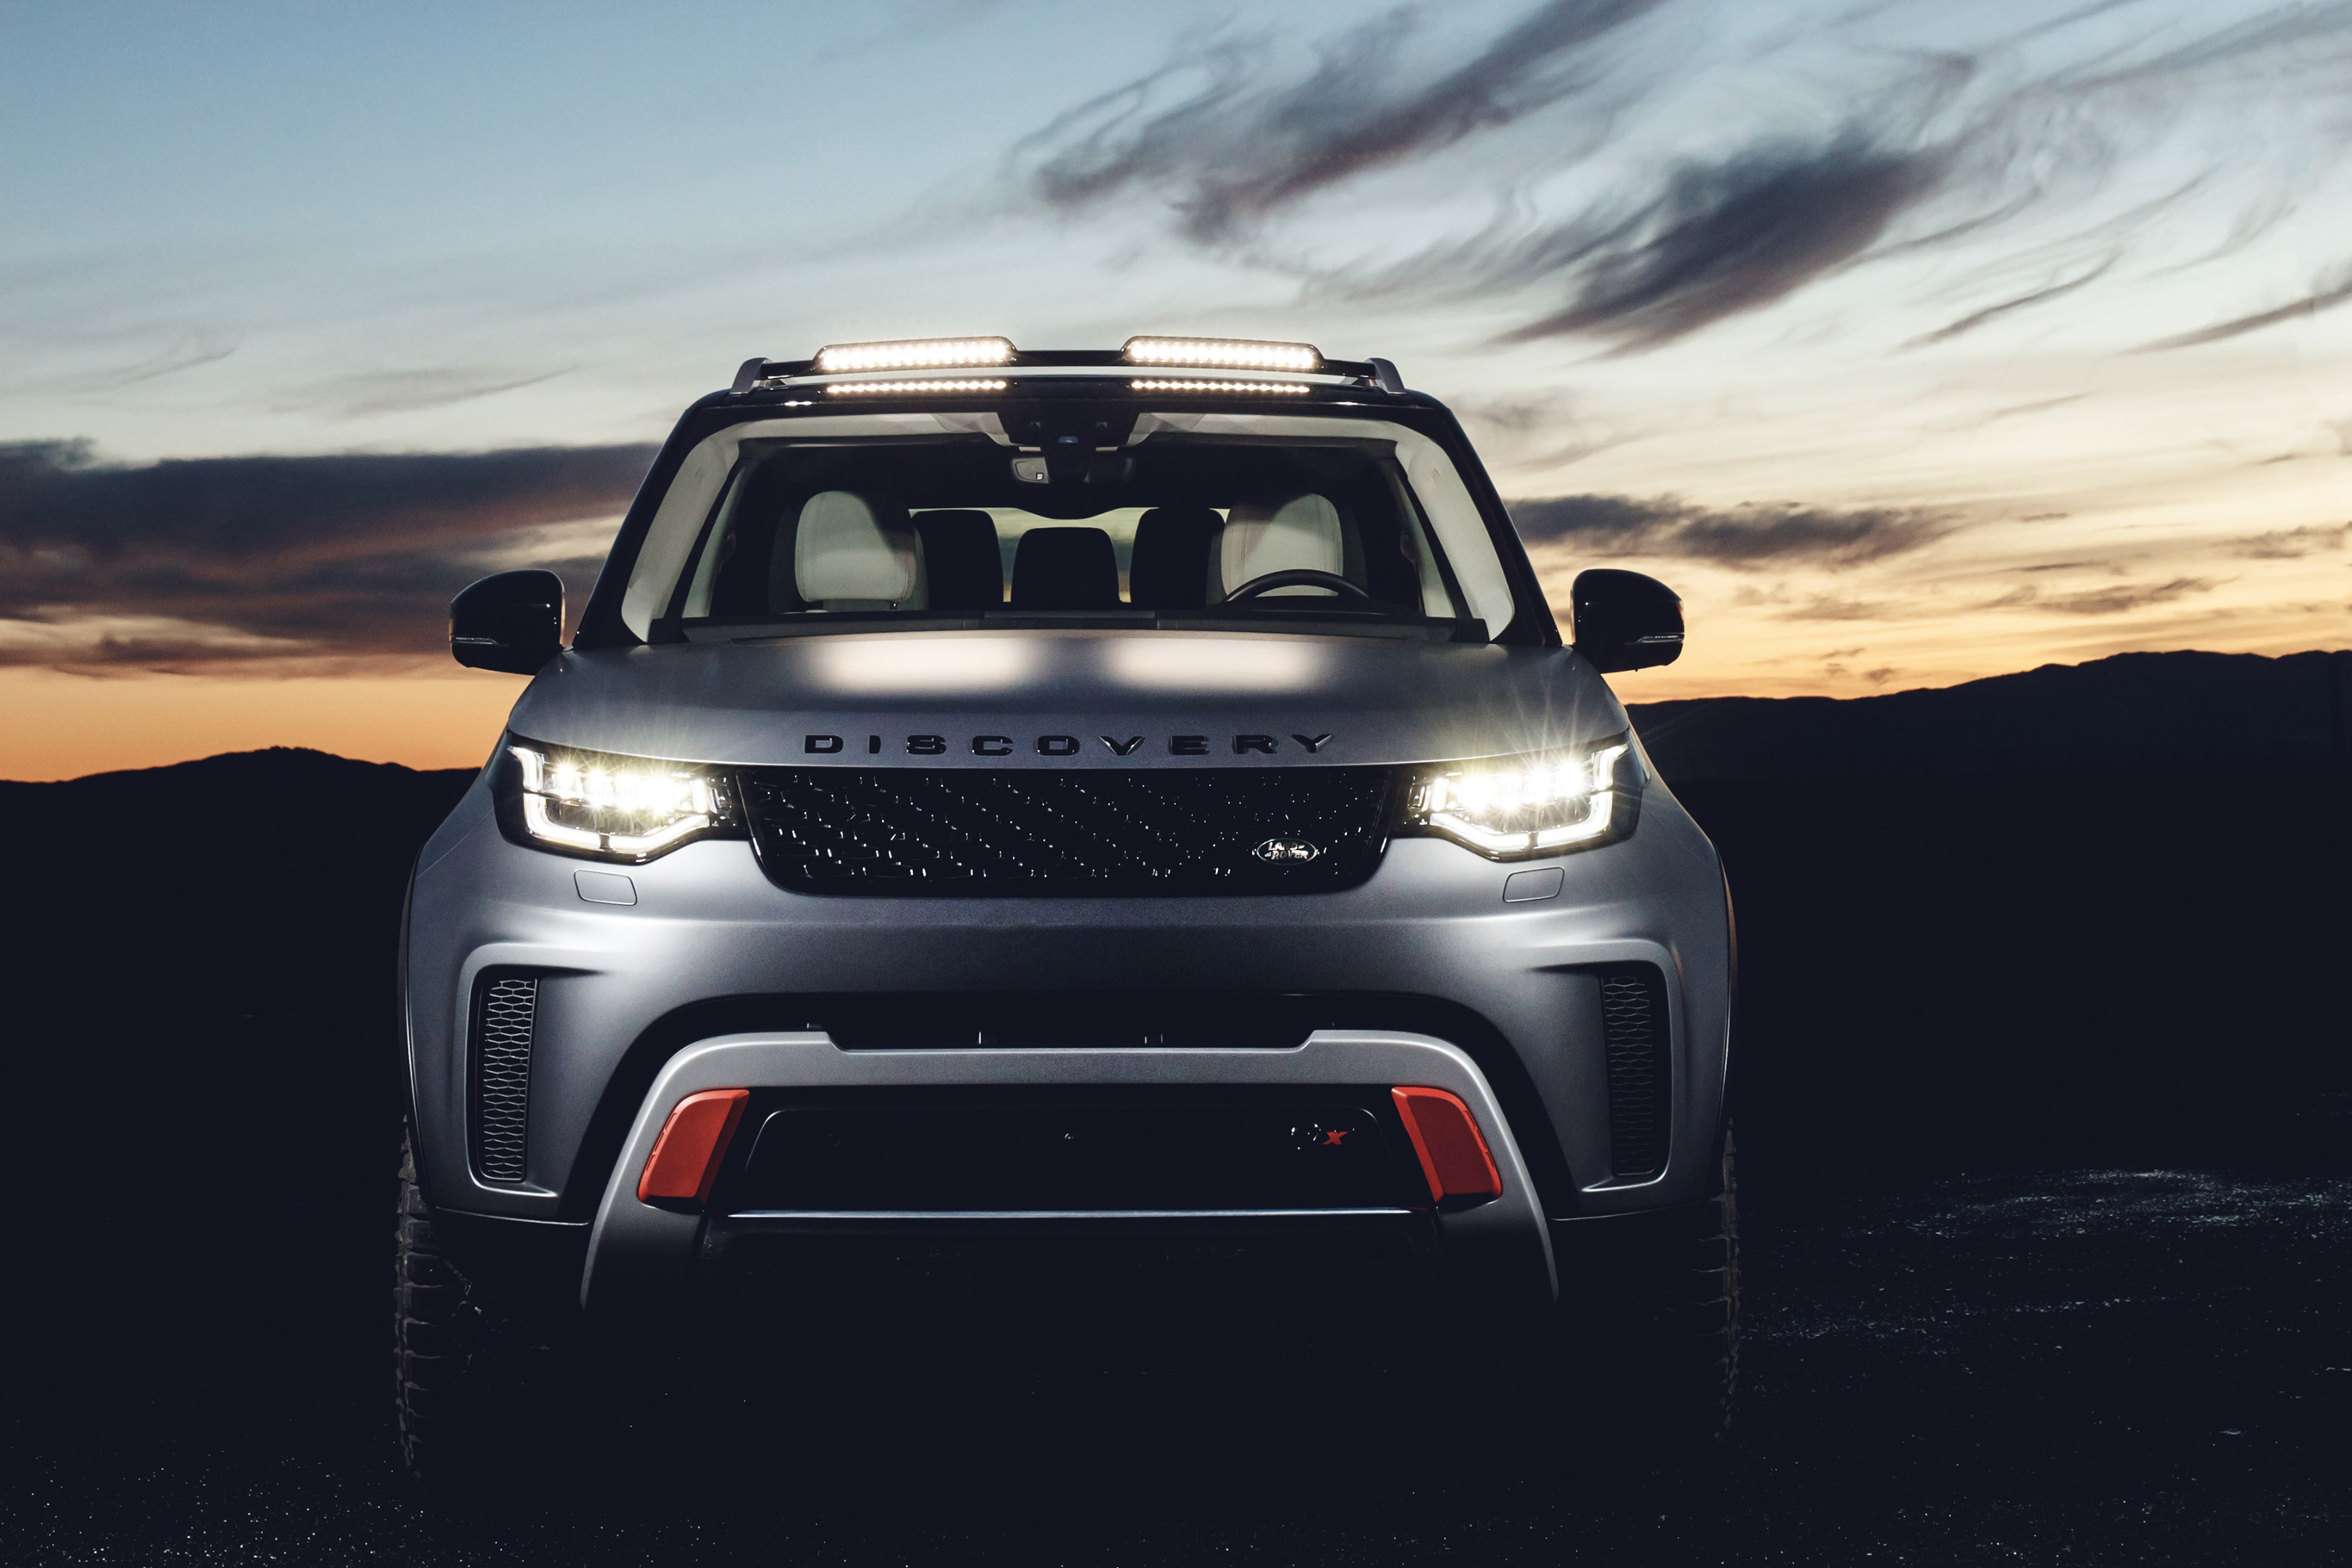 Land Rover Discovery, SVX edition, Cars 4k wallpapers, Auto expertise, 2740x1830 HD Desktop